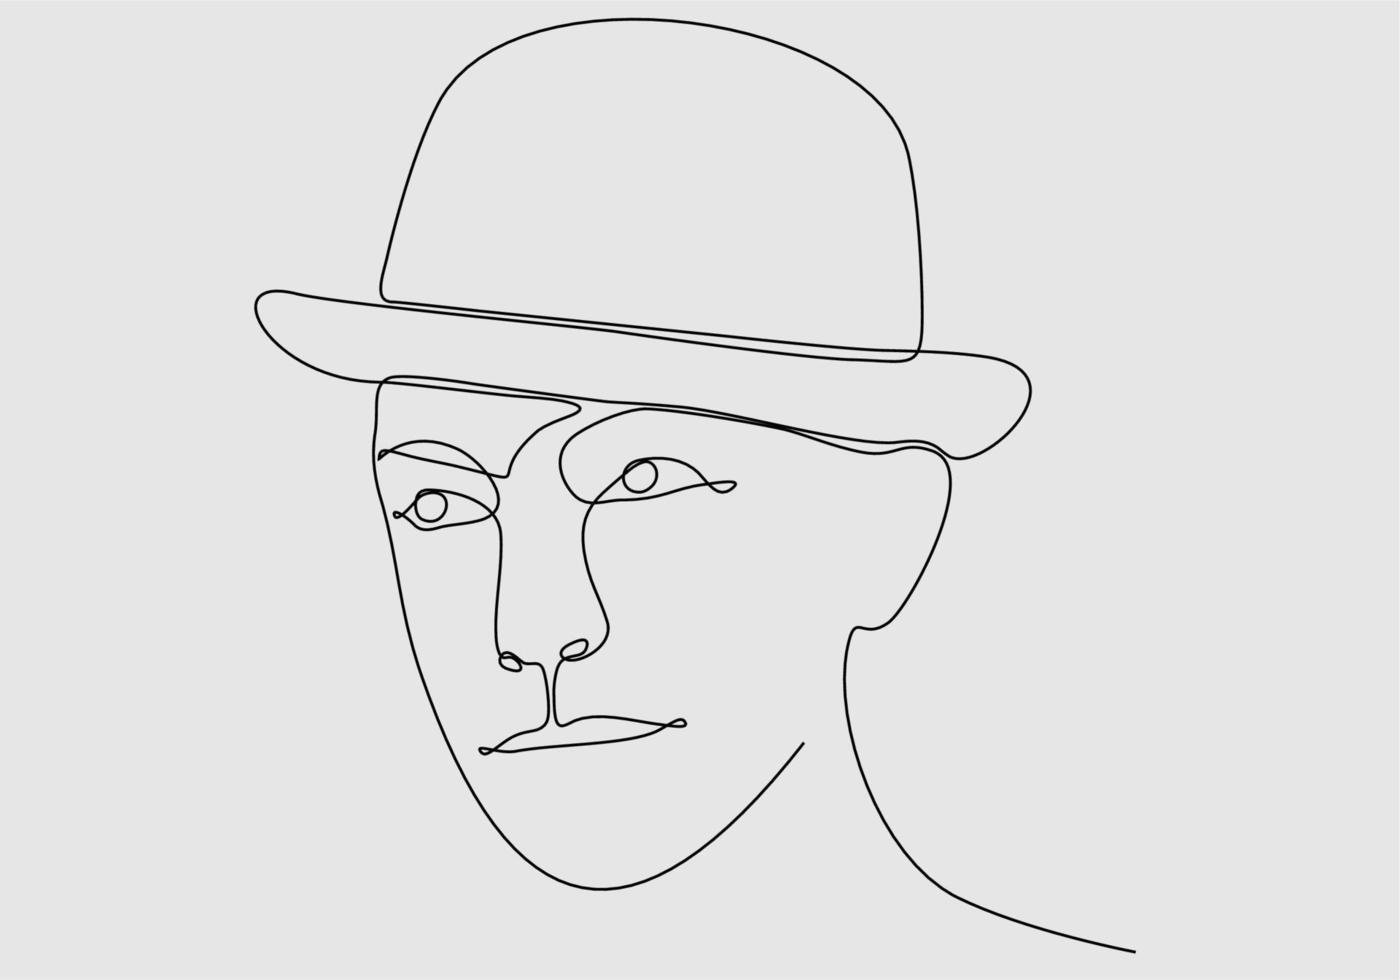 continuous line of hat man vector illustration